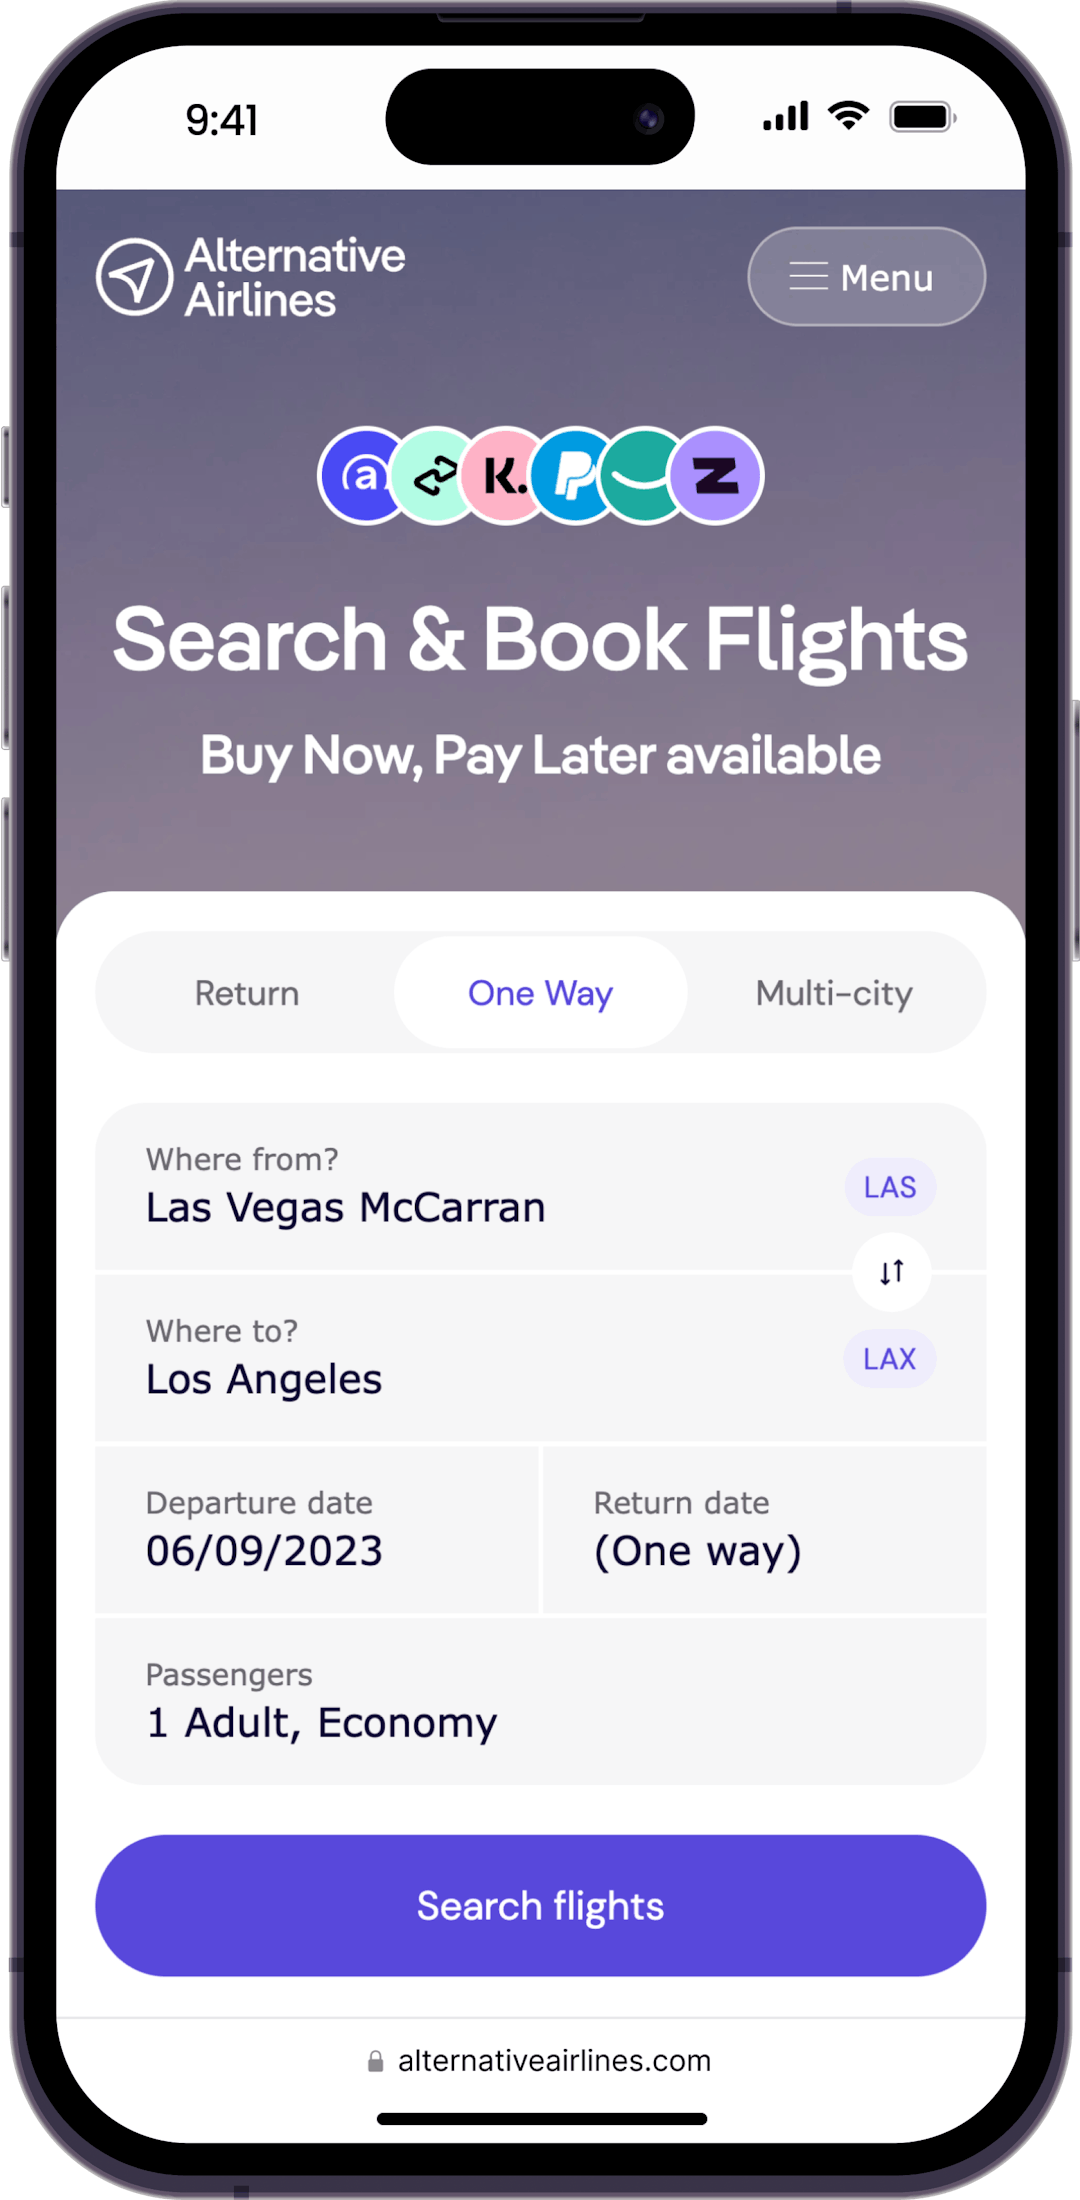 Step 1 - Search for Flights